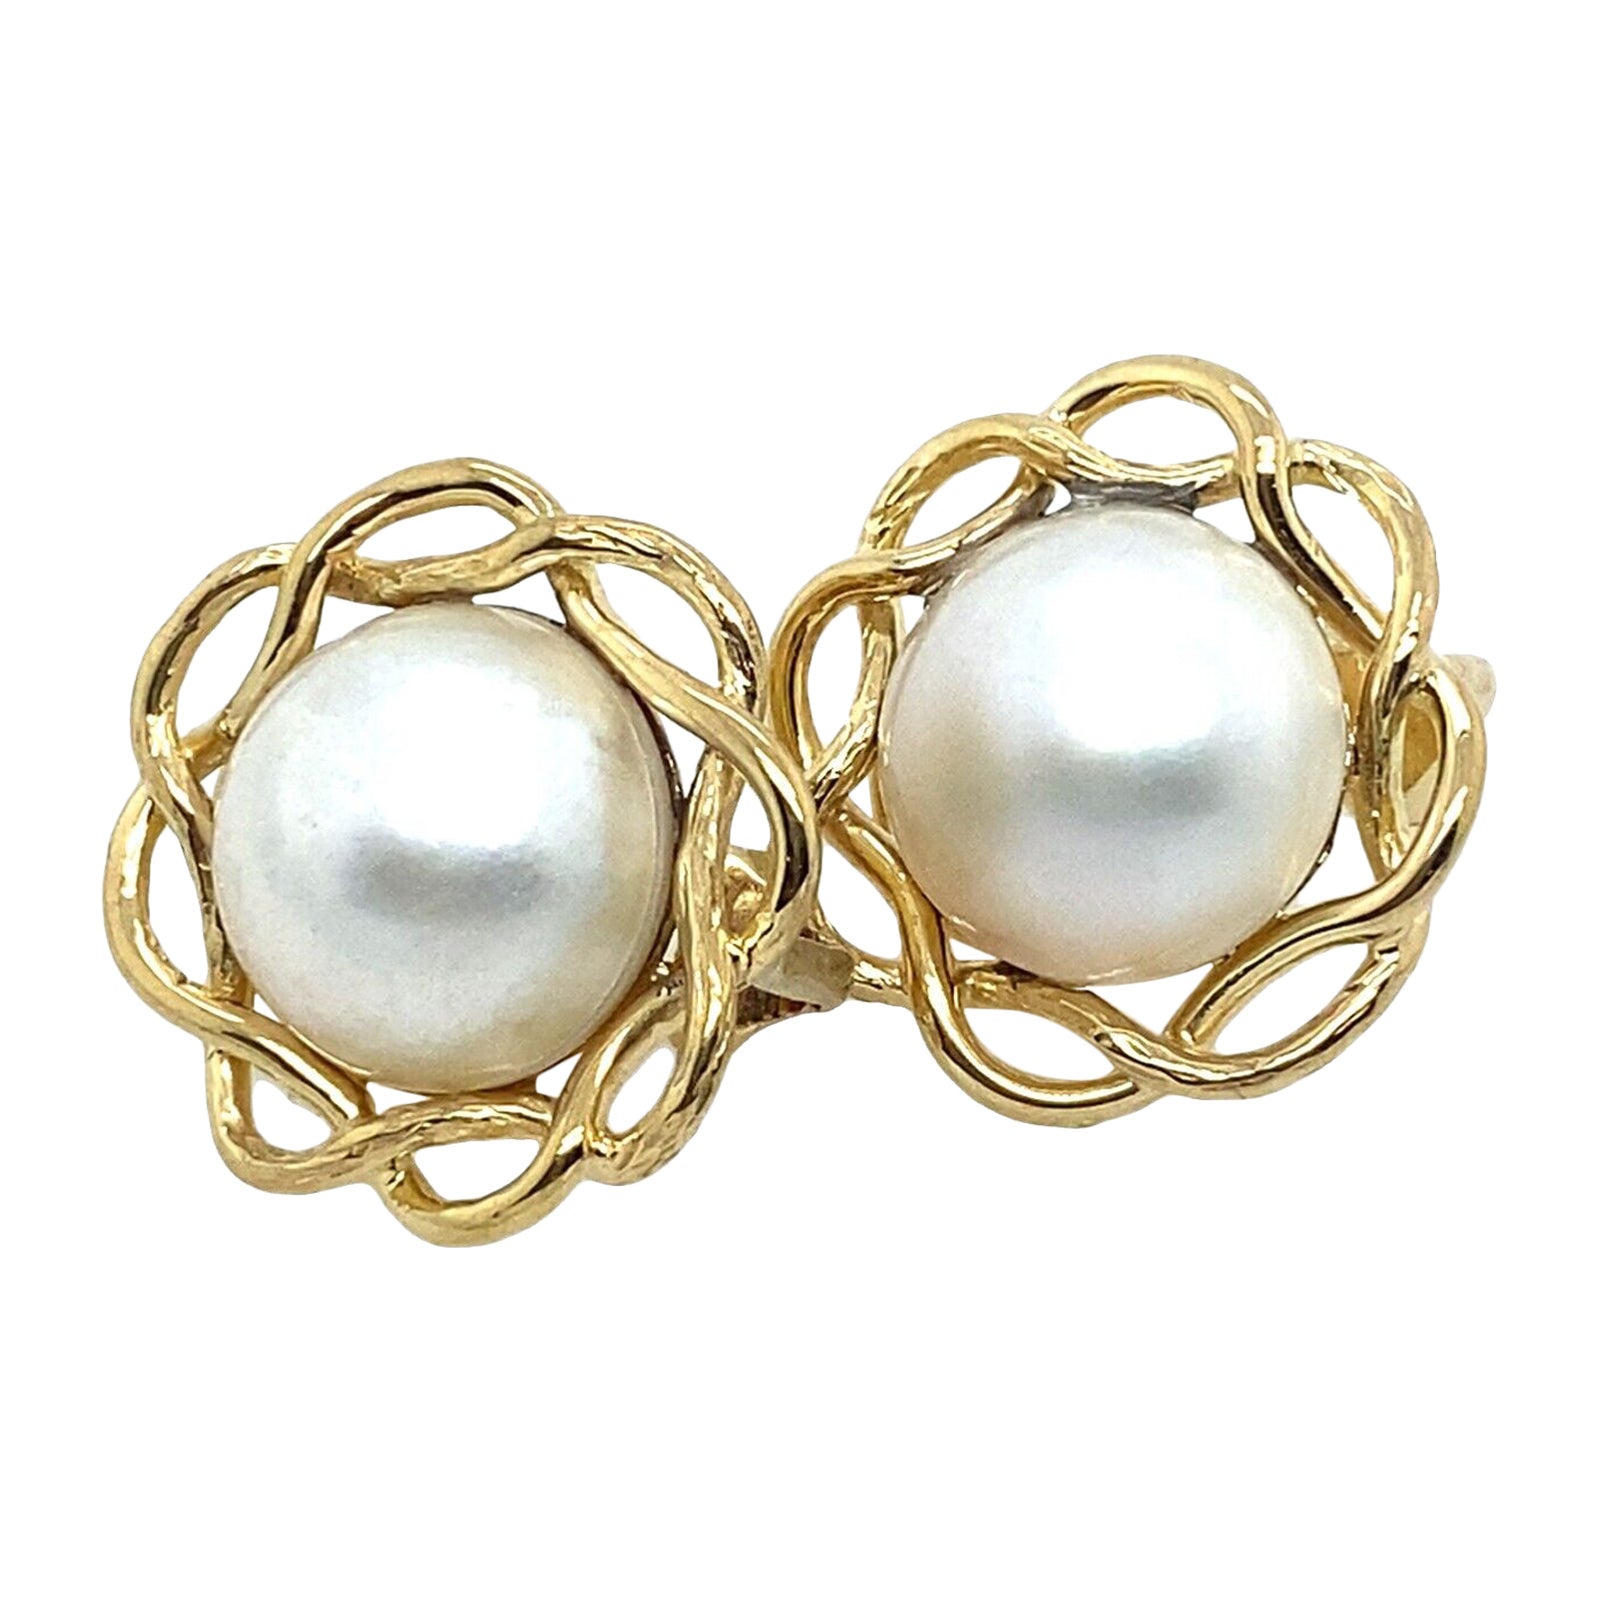 Marbeille Pearl Earrings Set in Yellow & White Gold